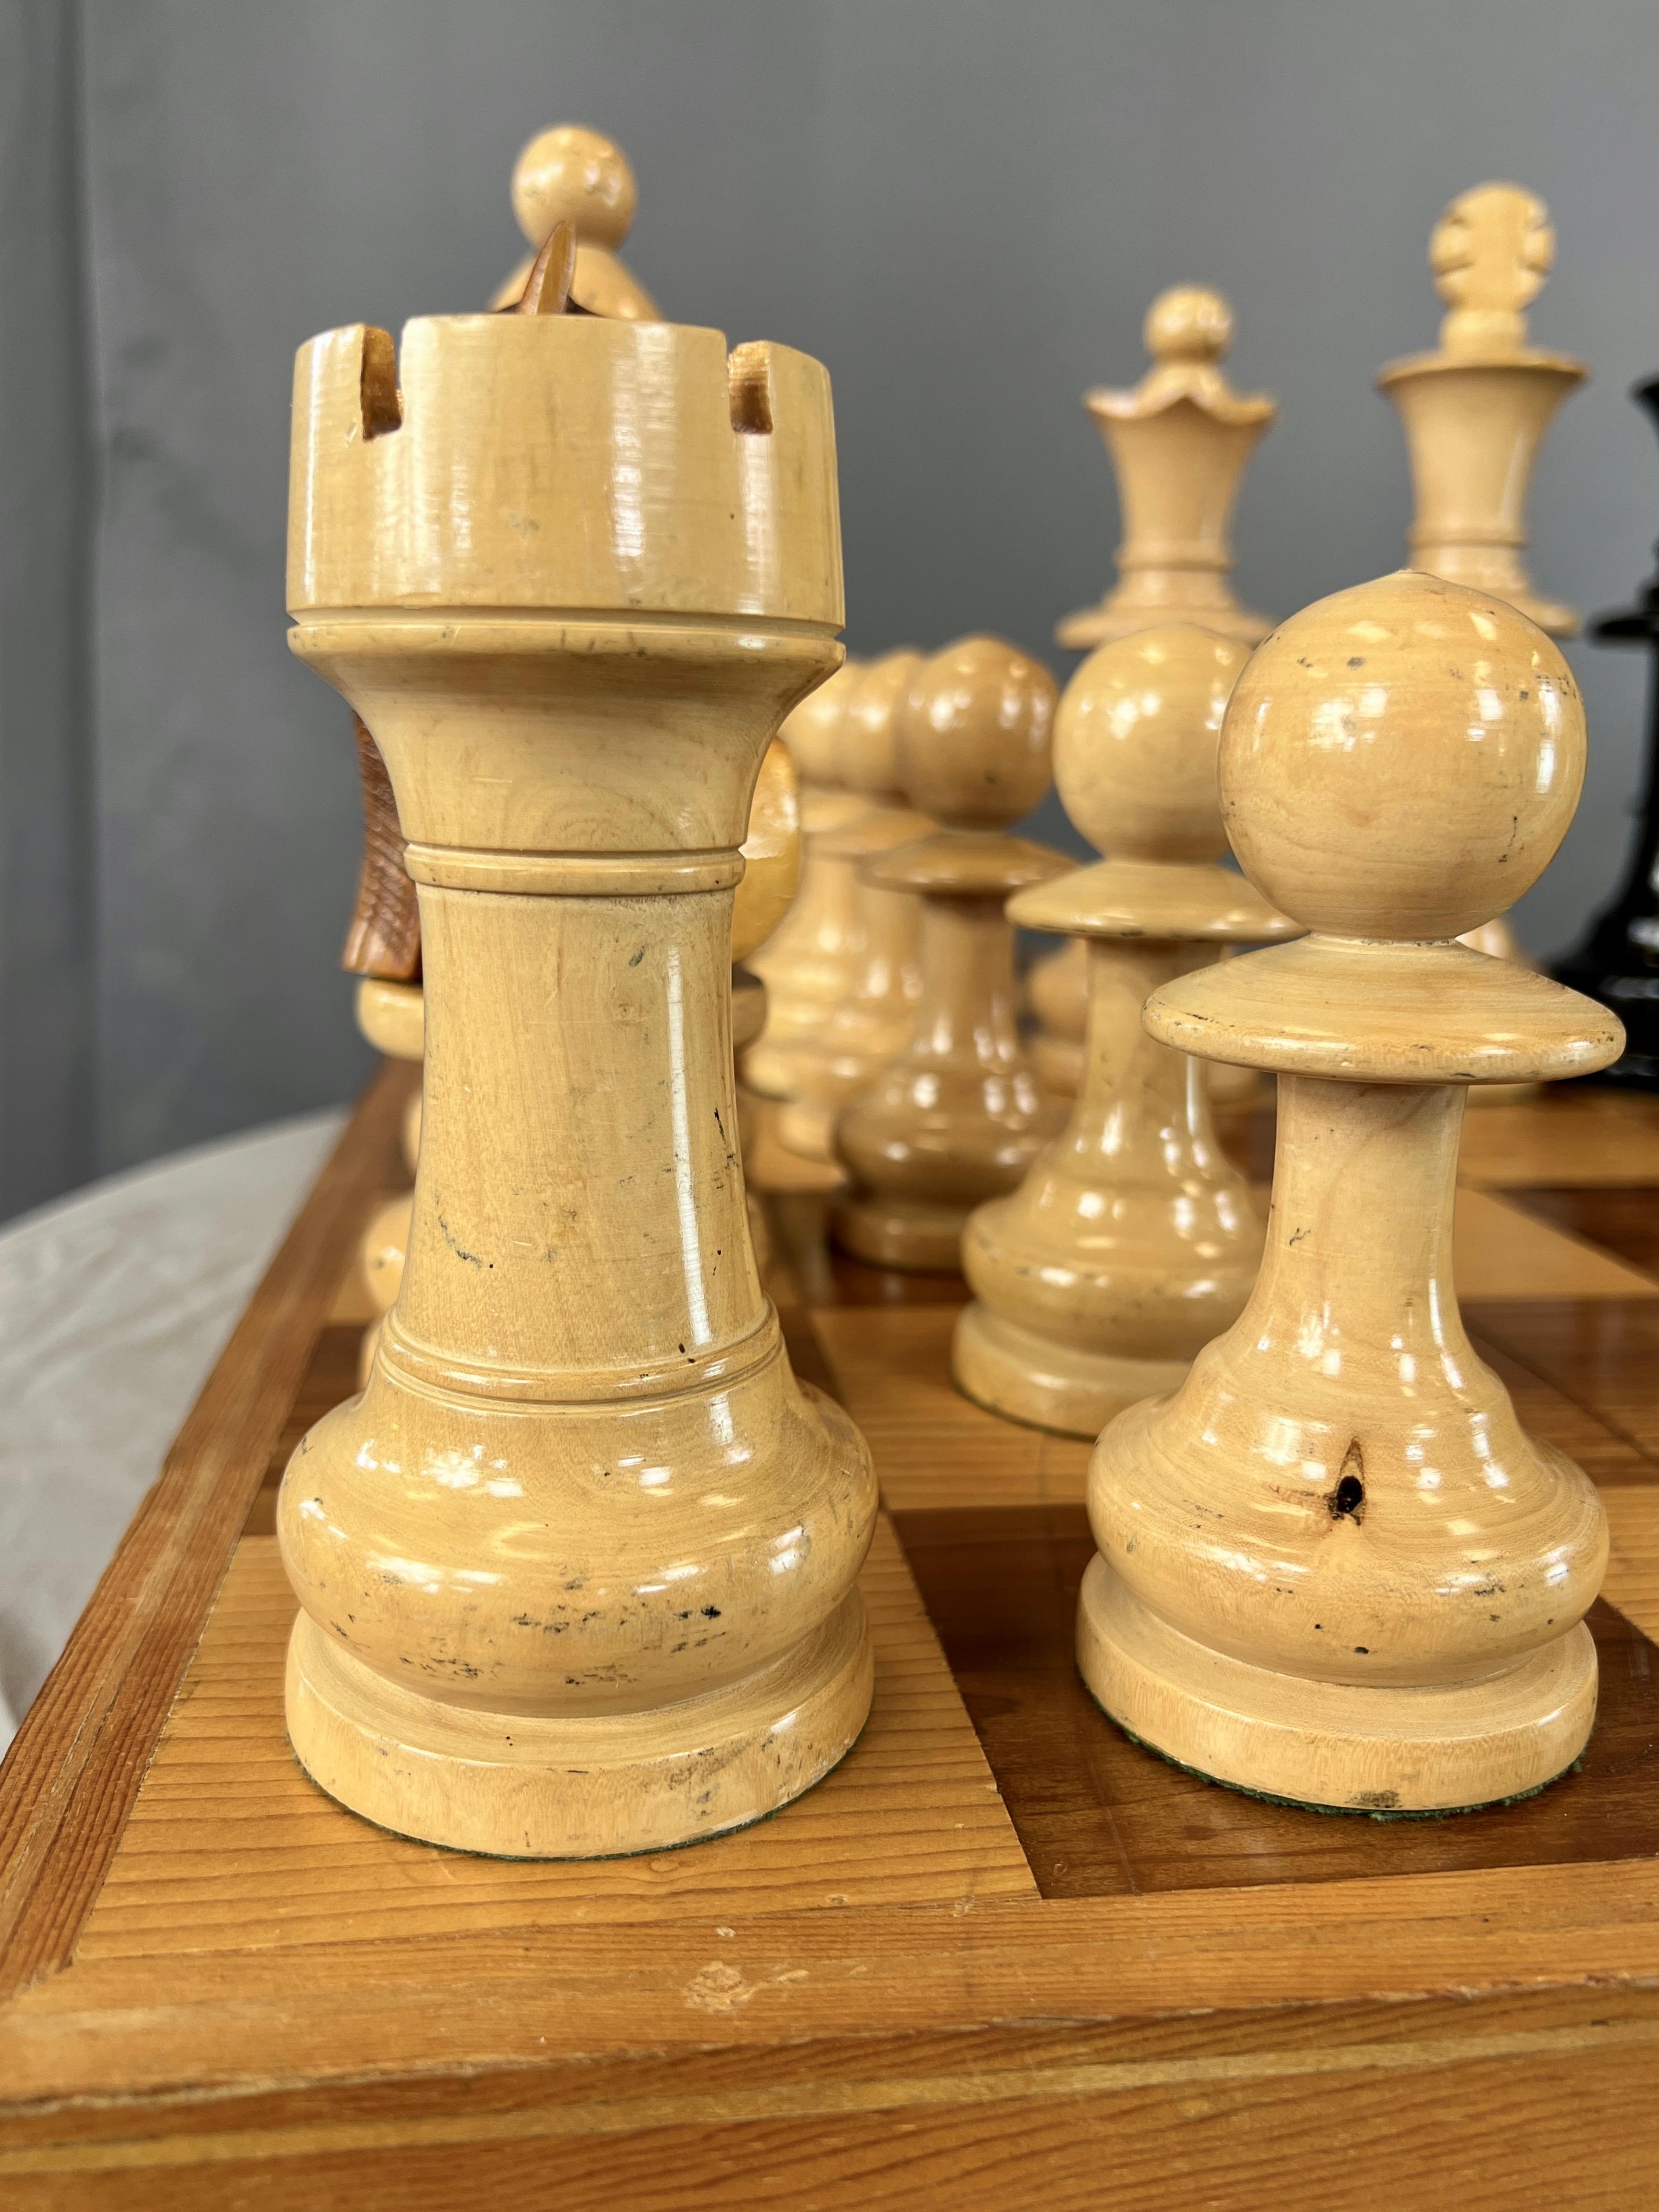 Unique & Monumental Hand Crafted Wooden Chess Set 33pc 3